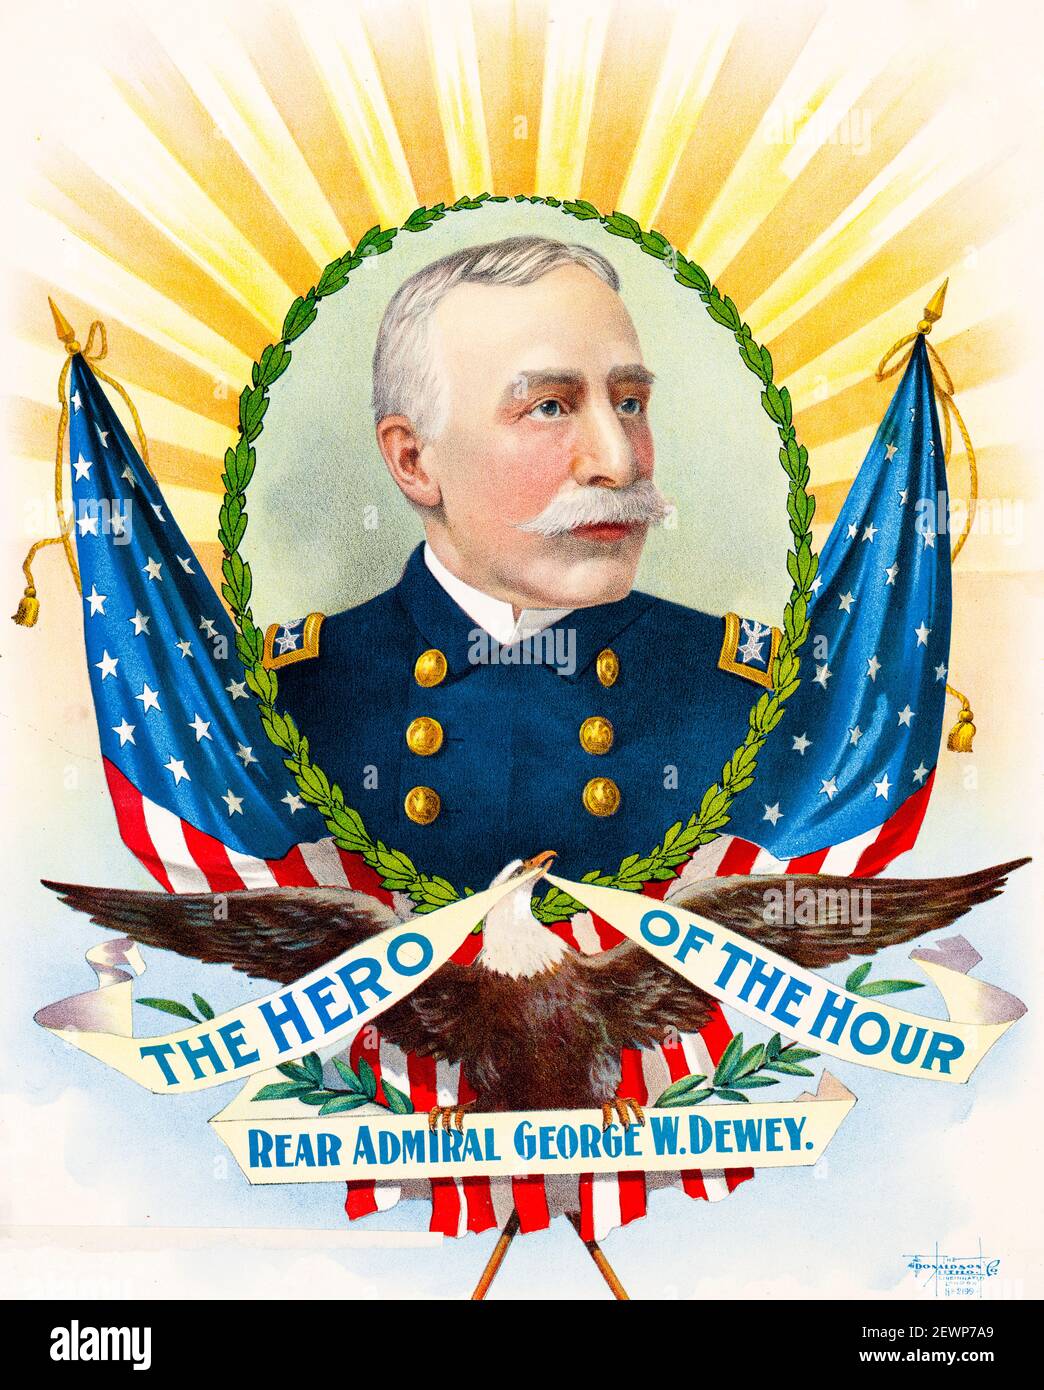 The Hero of the Hour, Admiral George Dewey (1837-1917), poster by Donaldson Lithography Company, circa 1898 Stock Photo